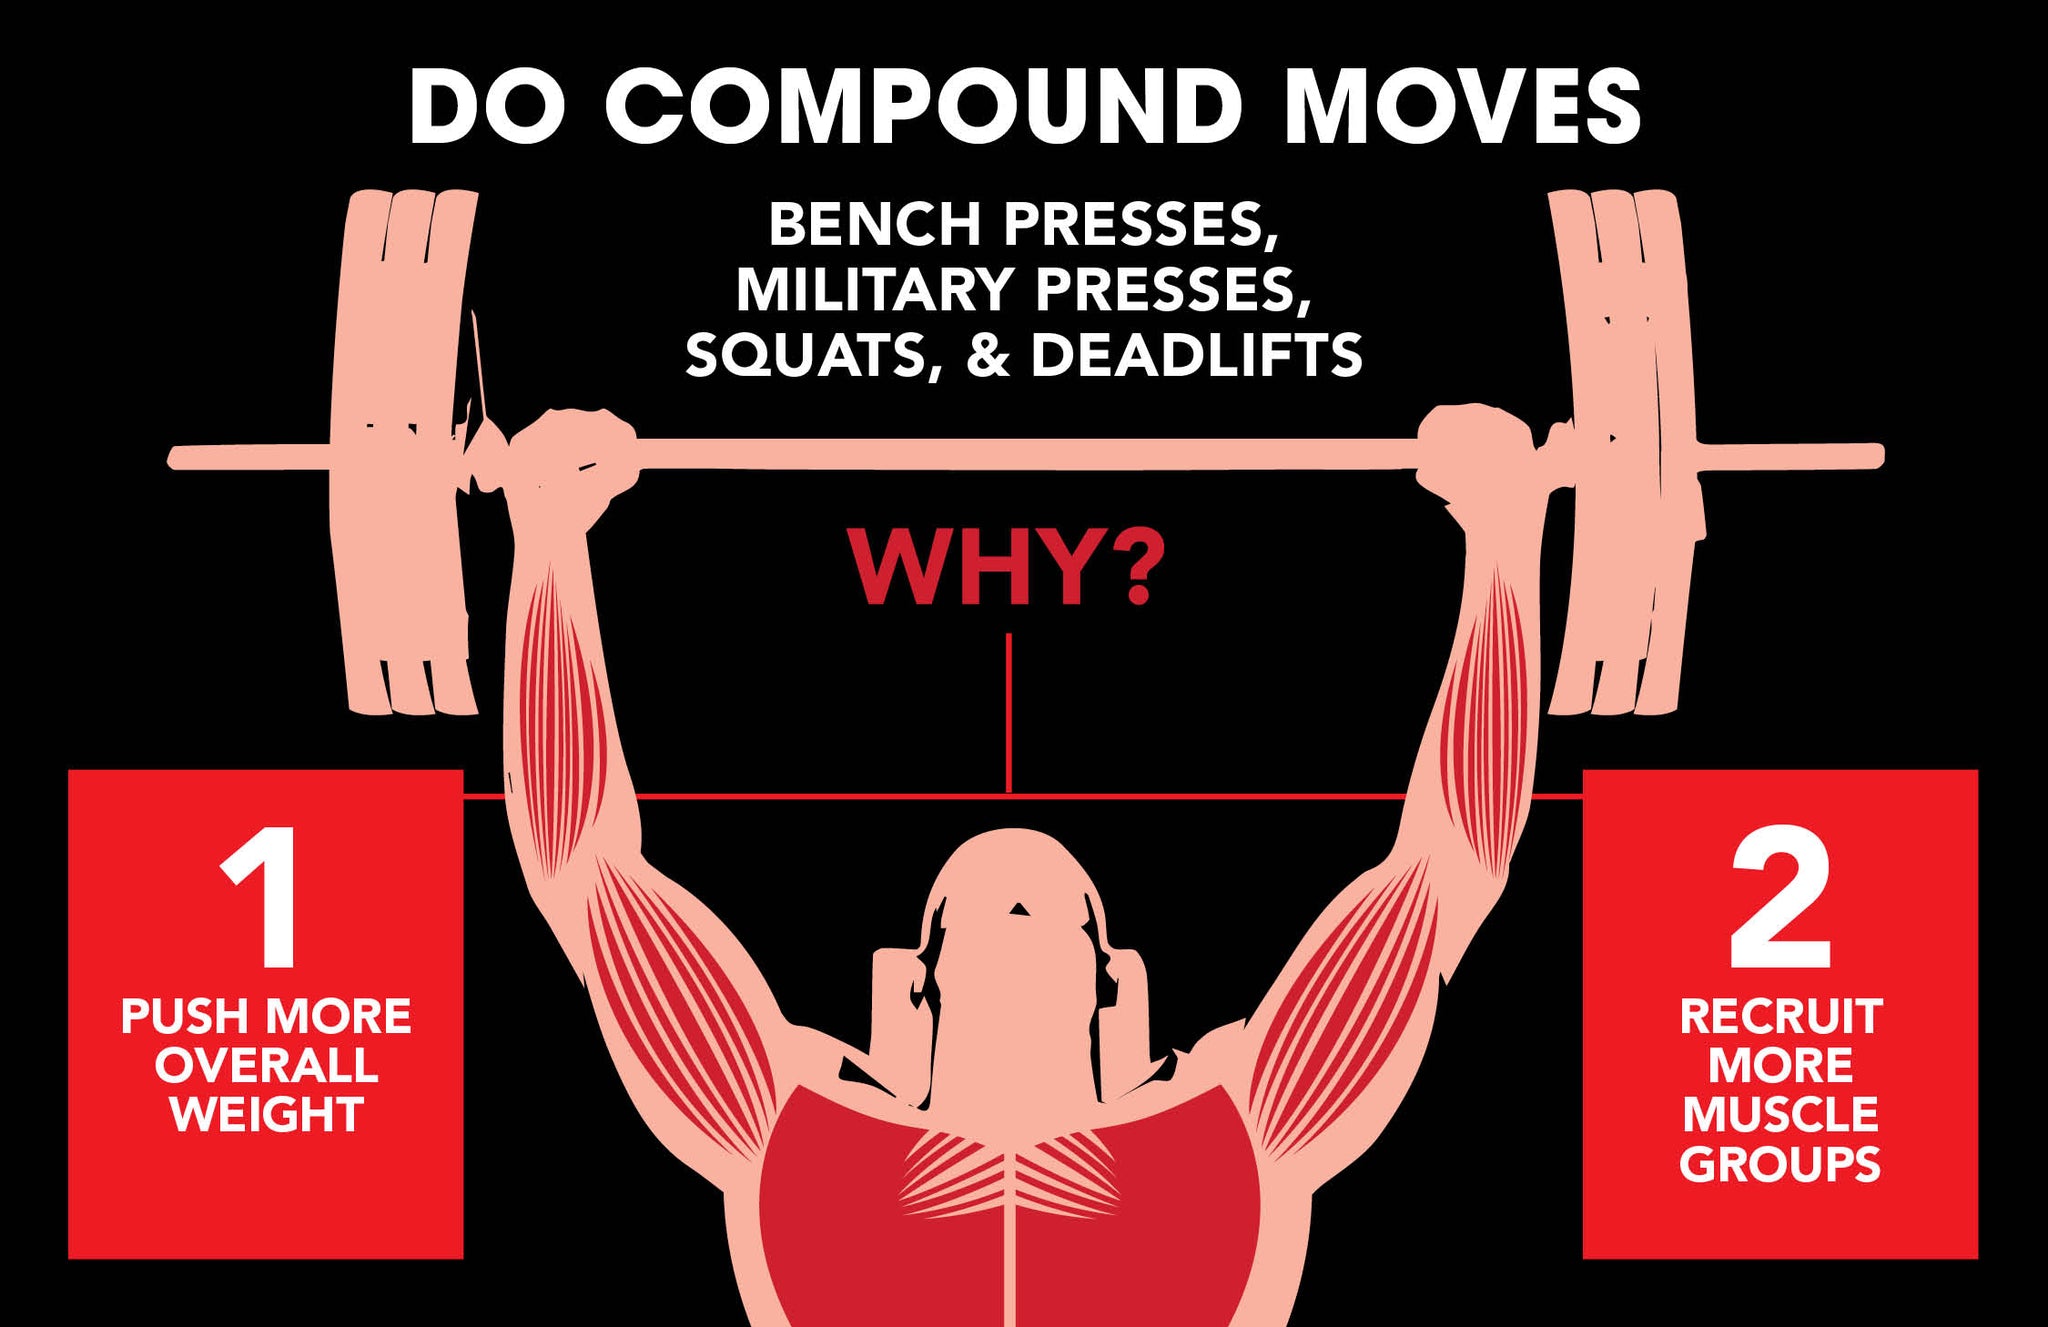 illustration of a compound workout move